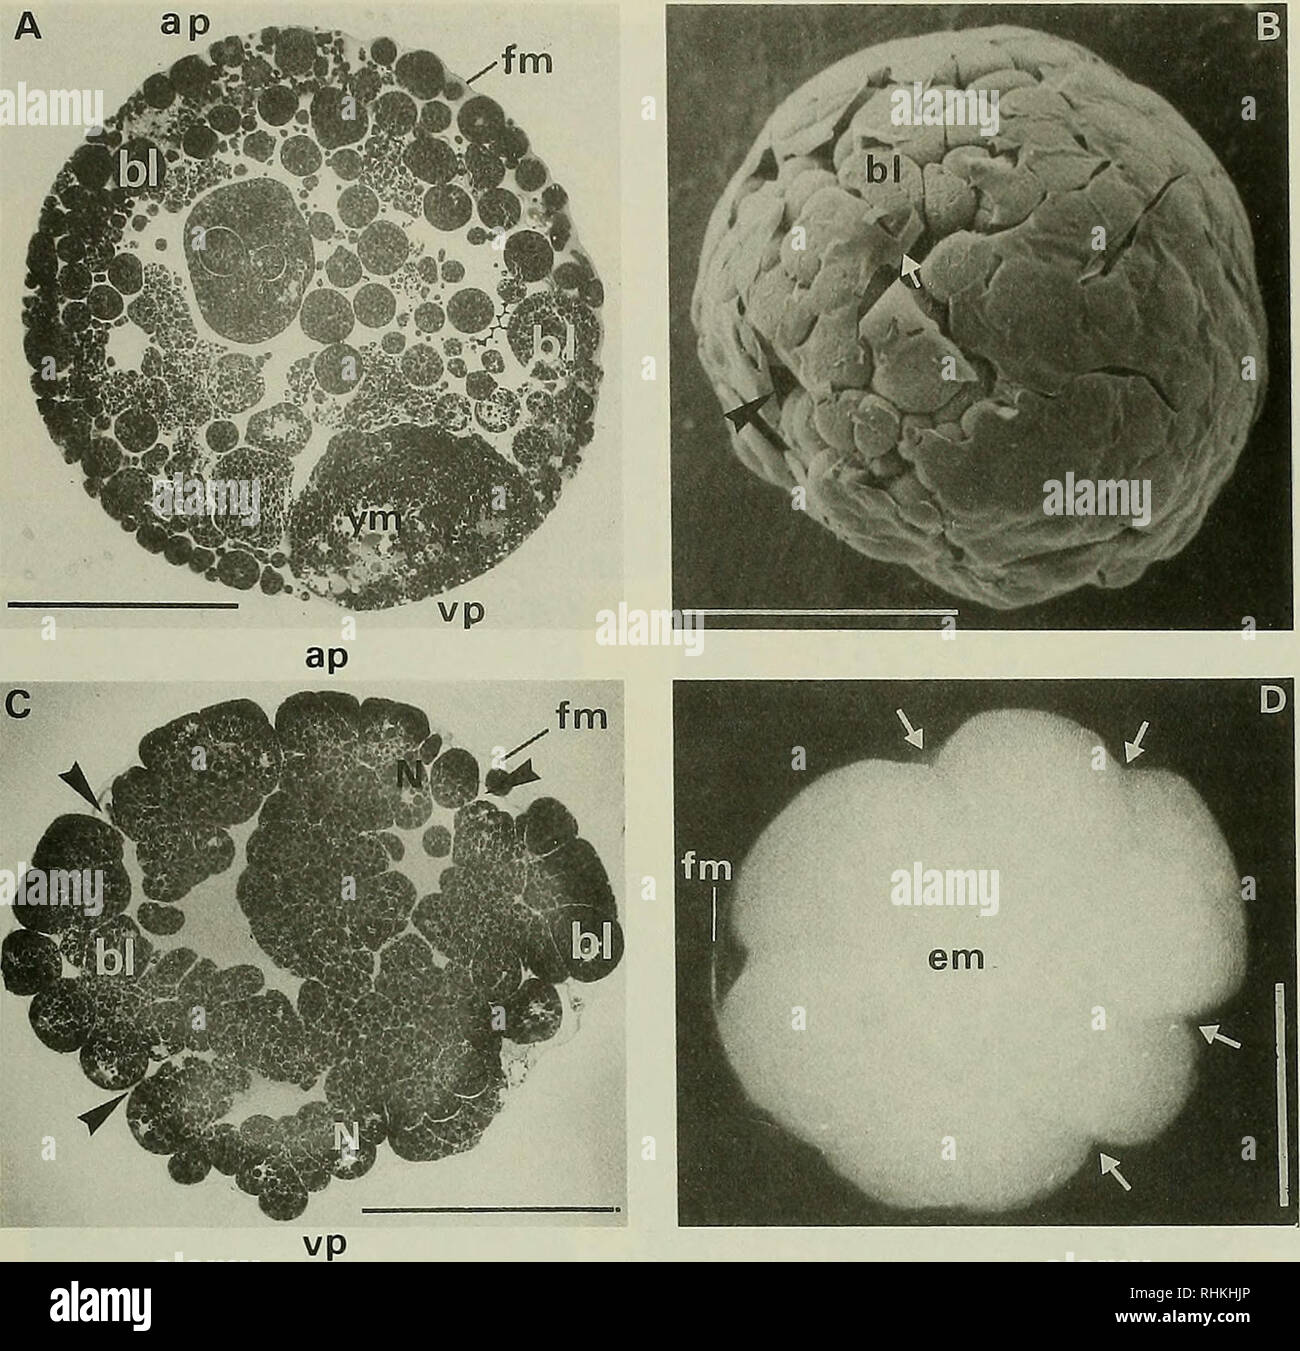 . The Biological bulletin. Biology; Zoology; Marine biology. COMPLETELY DIRECT DEVELOPMENT OF AN ECHINOID 31. Figure 4. Segmentation oi Abalus cordatus. (A) Section through a cleaved egg showing blastomeres and the remaining yolk mass at the vegetal pole (11 days after fertilization). (B) SEM view of a completely cleaved egg (14 days after fertilization). Blastomeres are visible where the fertilization membrane is destroyed (white arrow). Black arrow shows a furrow. (C) Section through a cleaved egg at the end of the segmentation (15 days after fertilization). Black arrows show the large inter Stock Photo